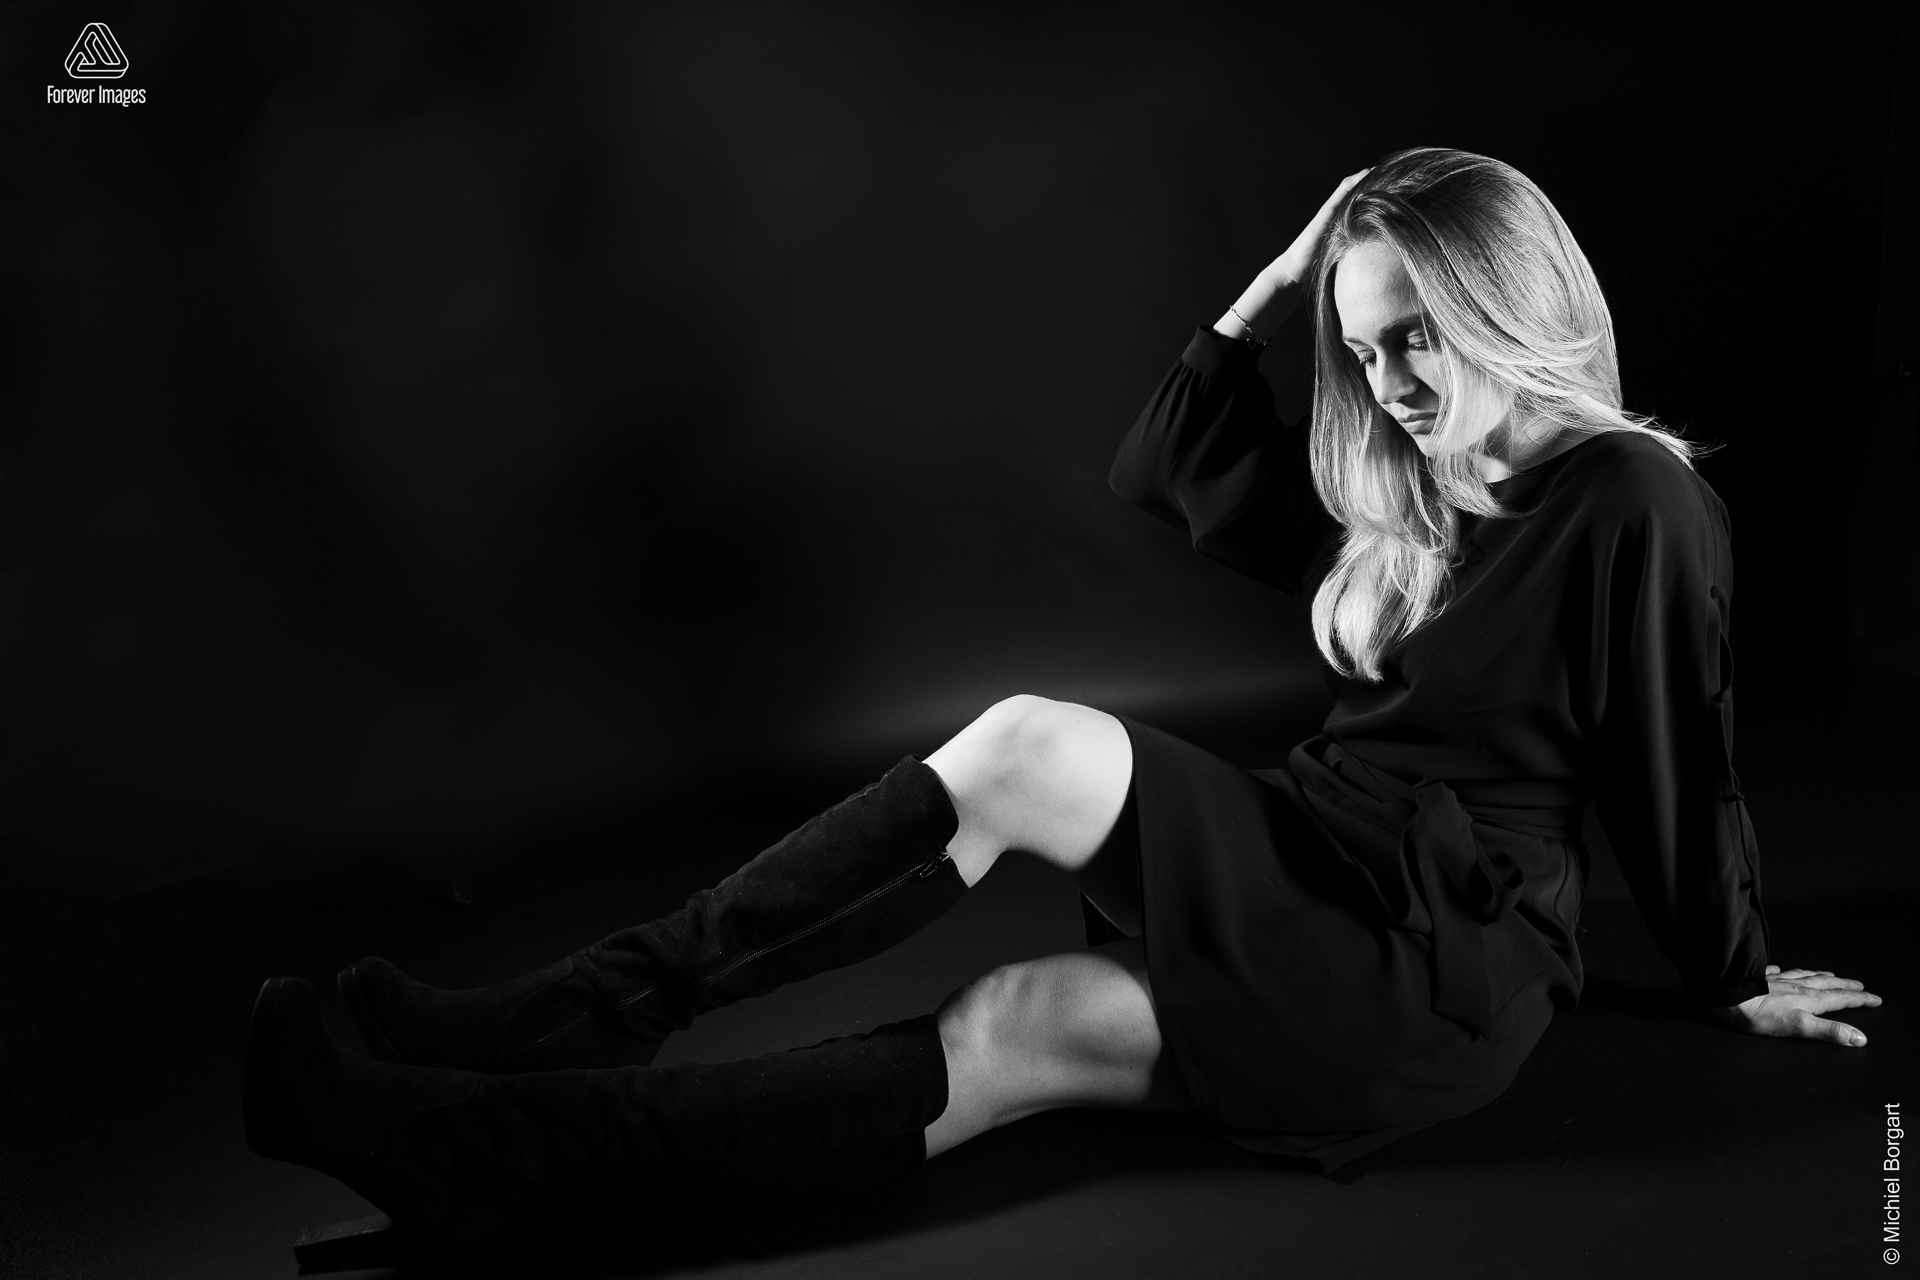 Portrait photo black and white B&W low-key young lady sitting black dress and black boots | Fanziska | Portrait Photographer Michiel Borgart - Forever Images.